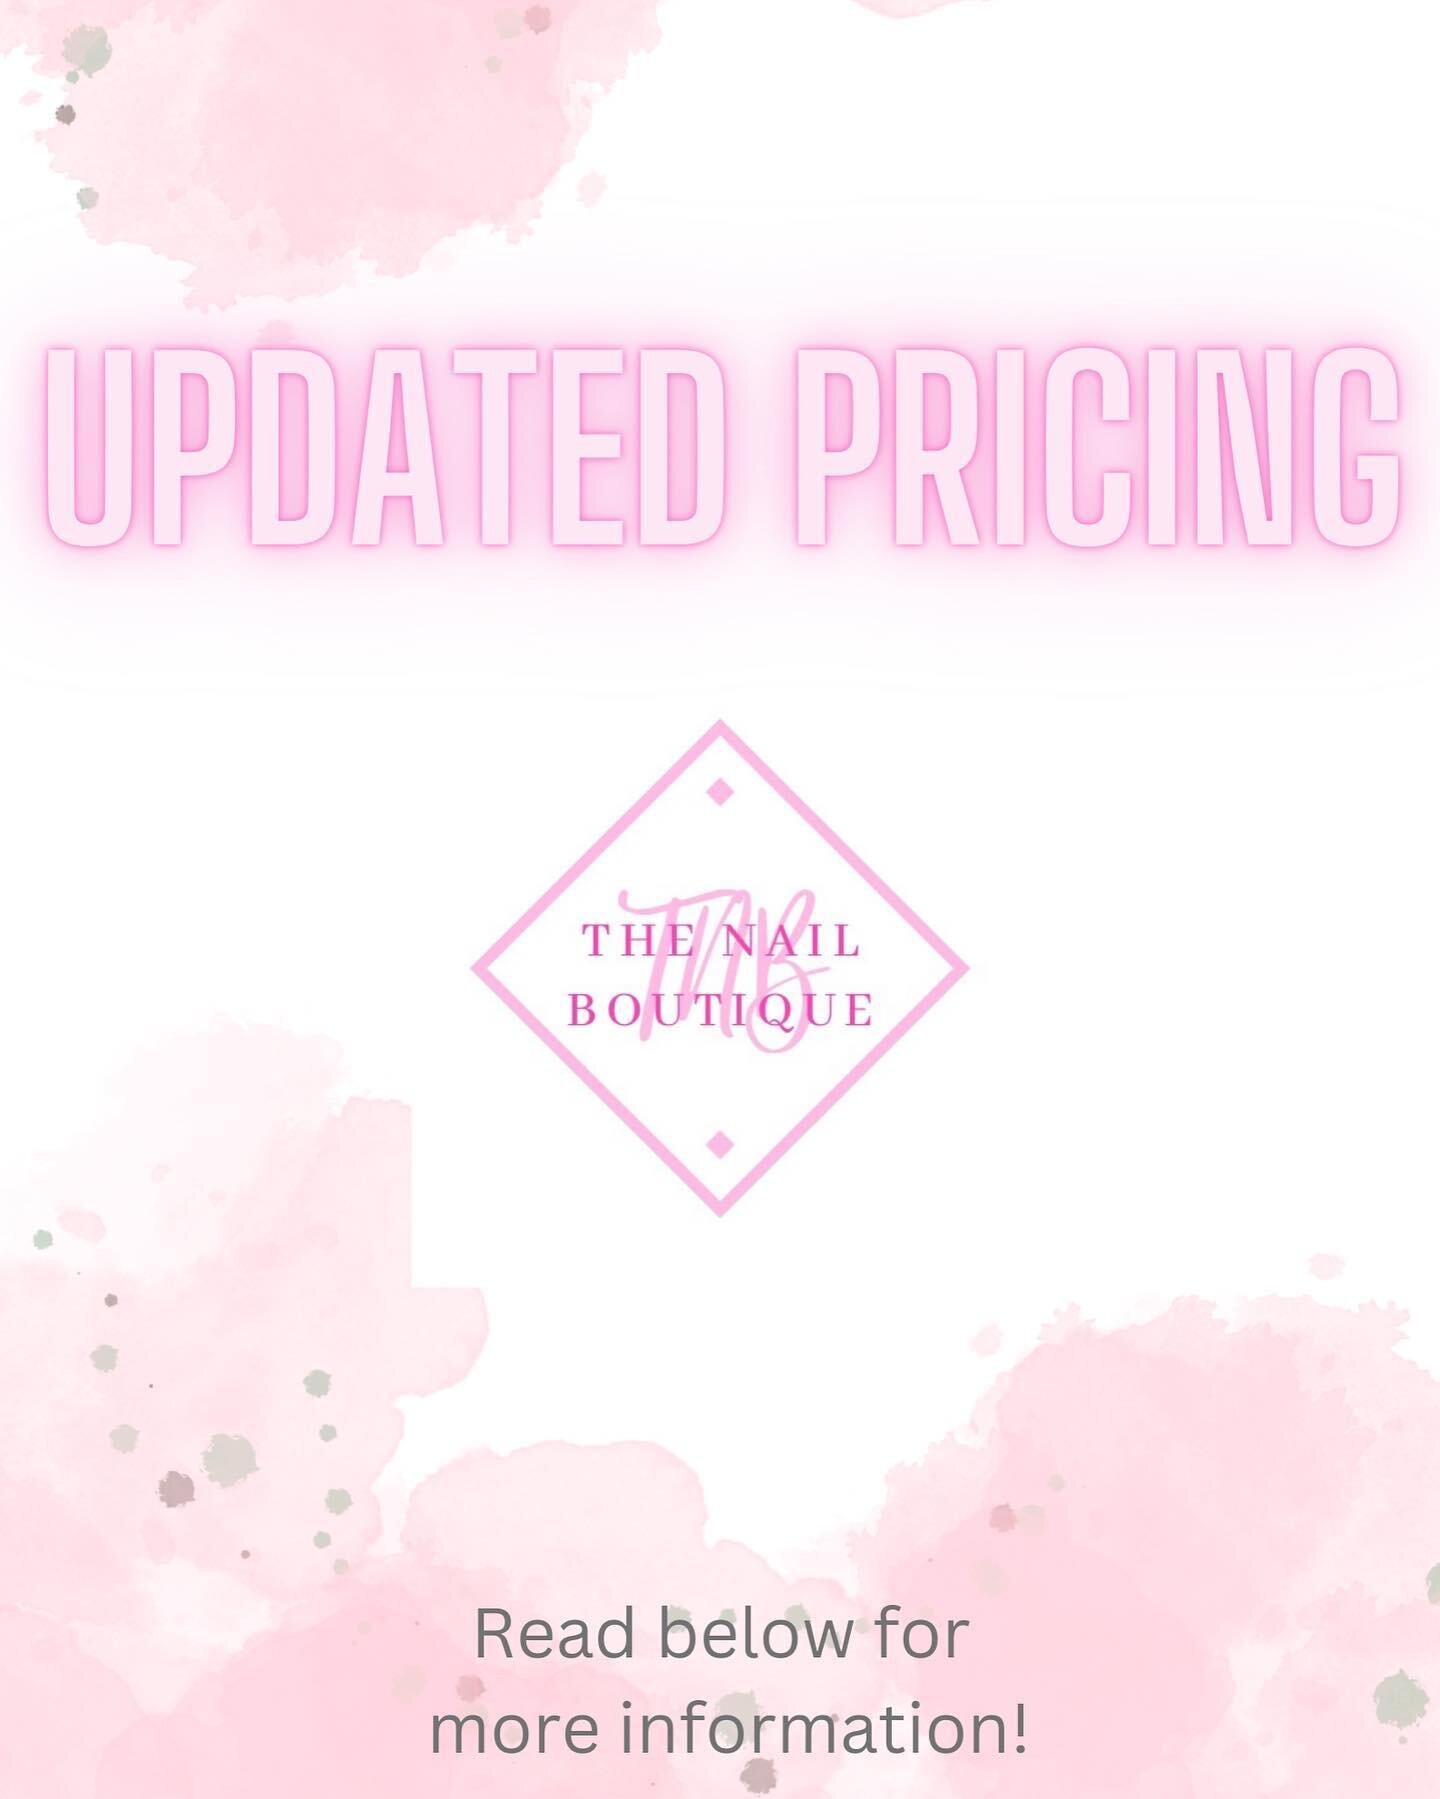 Effective February 1st, there will be an increase in prices for some services we offer here at The Nail Boutique.
 Please be aware of these changes while booking future appointments with our team! 

The new prices will allow us to better serve you an